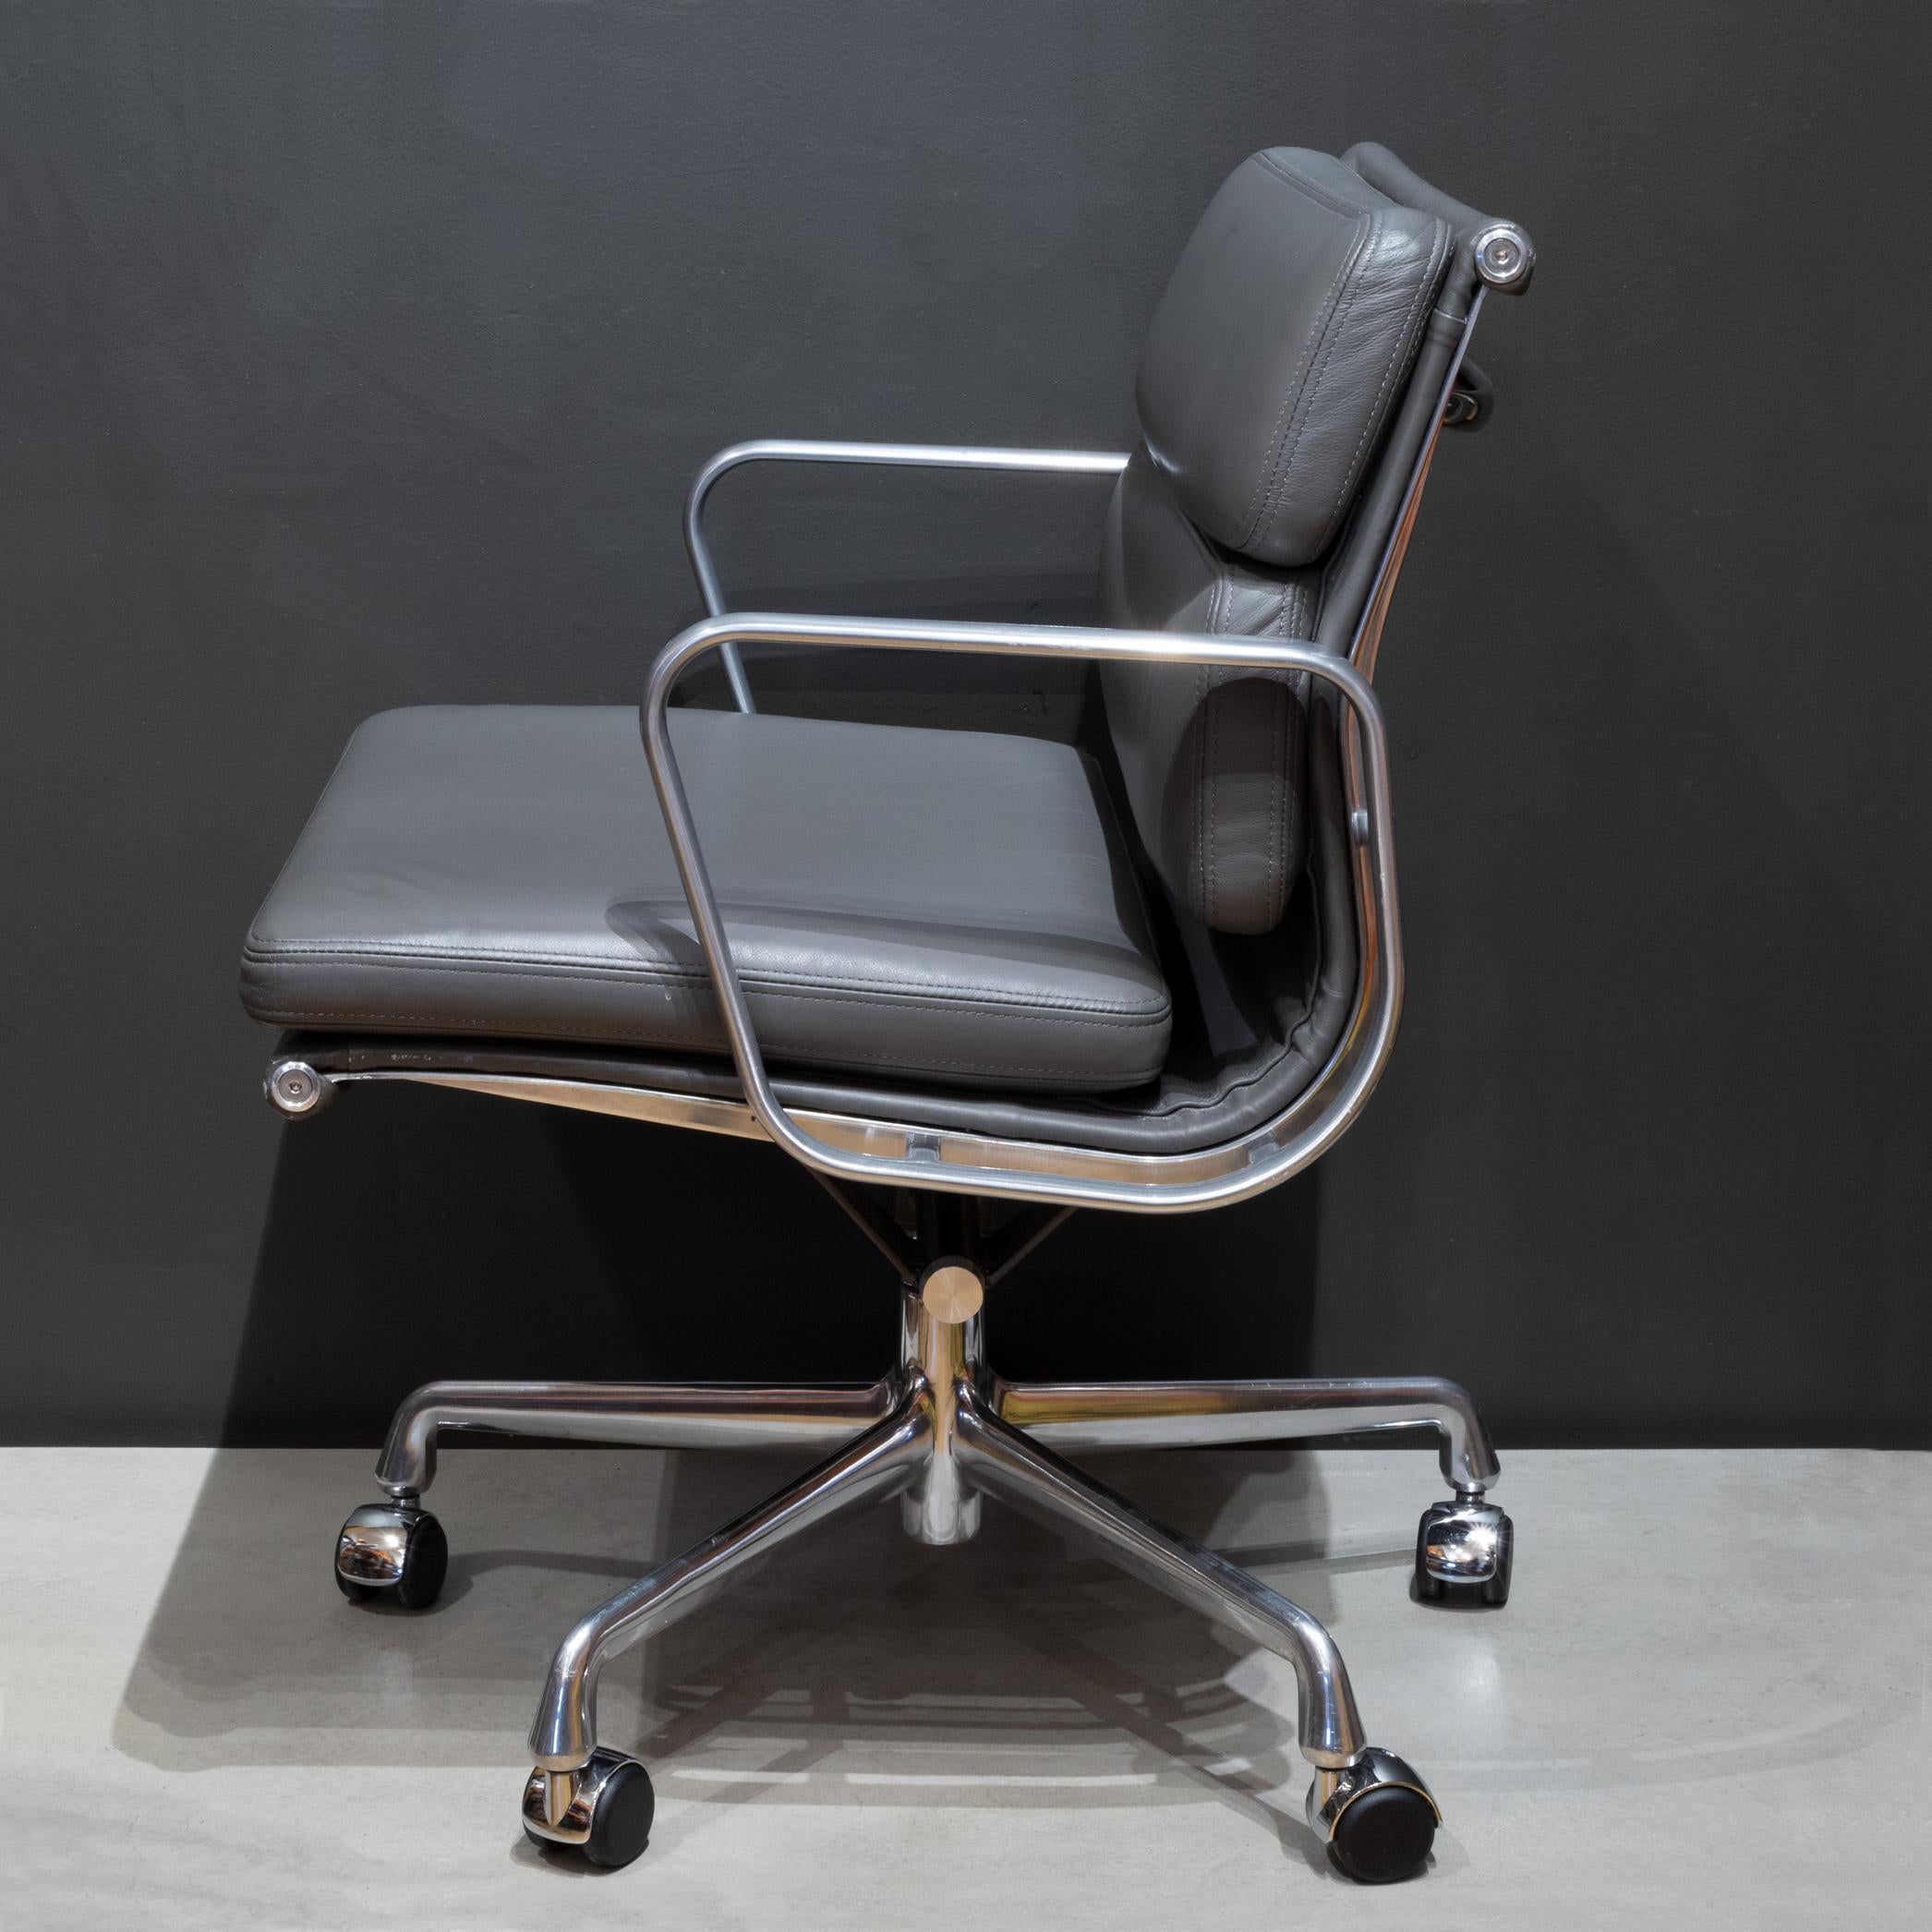 About

Eames soft pad leather office management swivel chair in Grey leather with polished aluminum base and casters. Original Herman Miller label on each chair.

 Creator Eames for Herman Miller.
Date of manufacture circa 2014.
Materials and